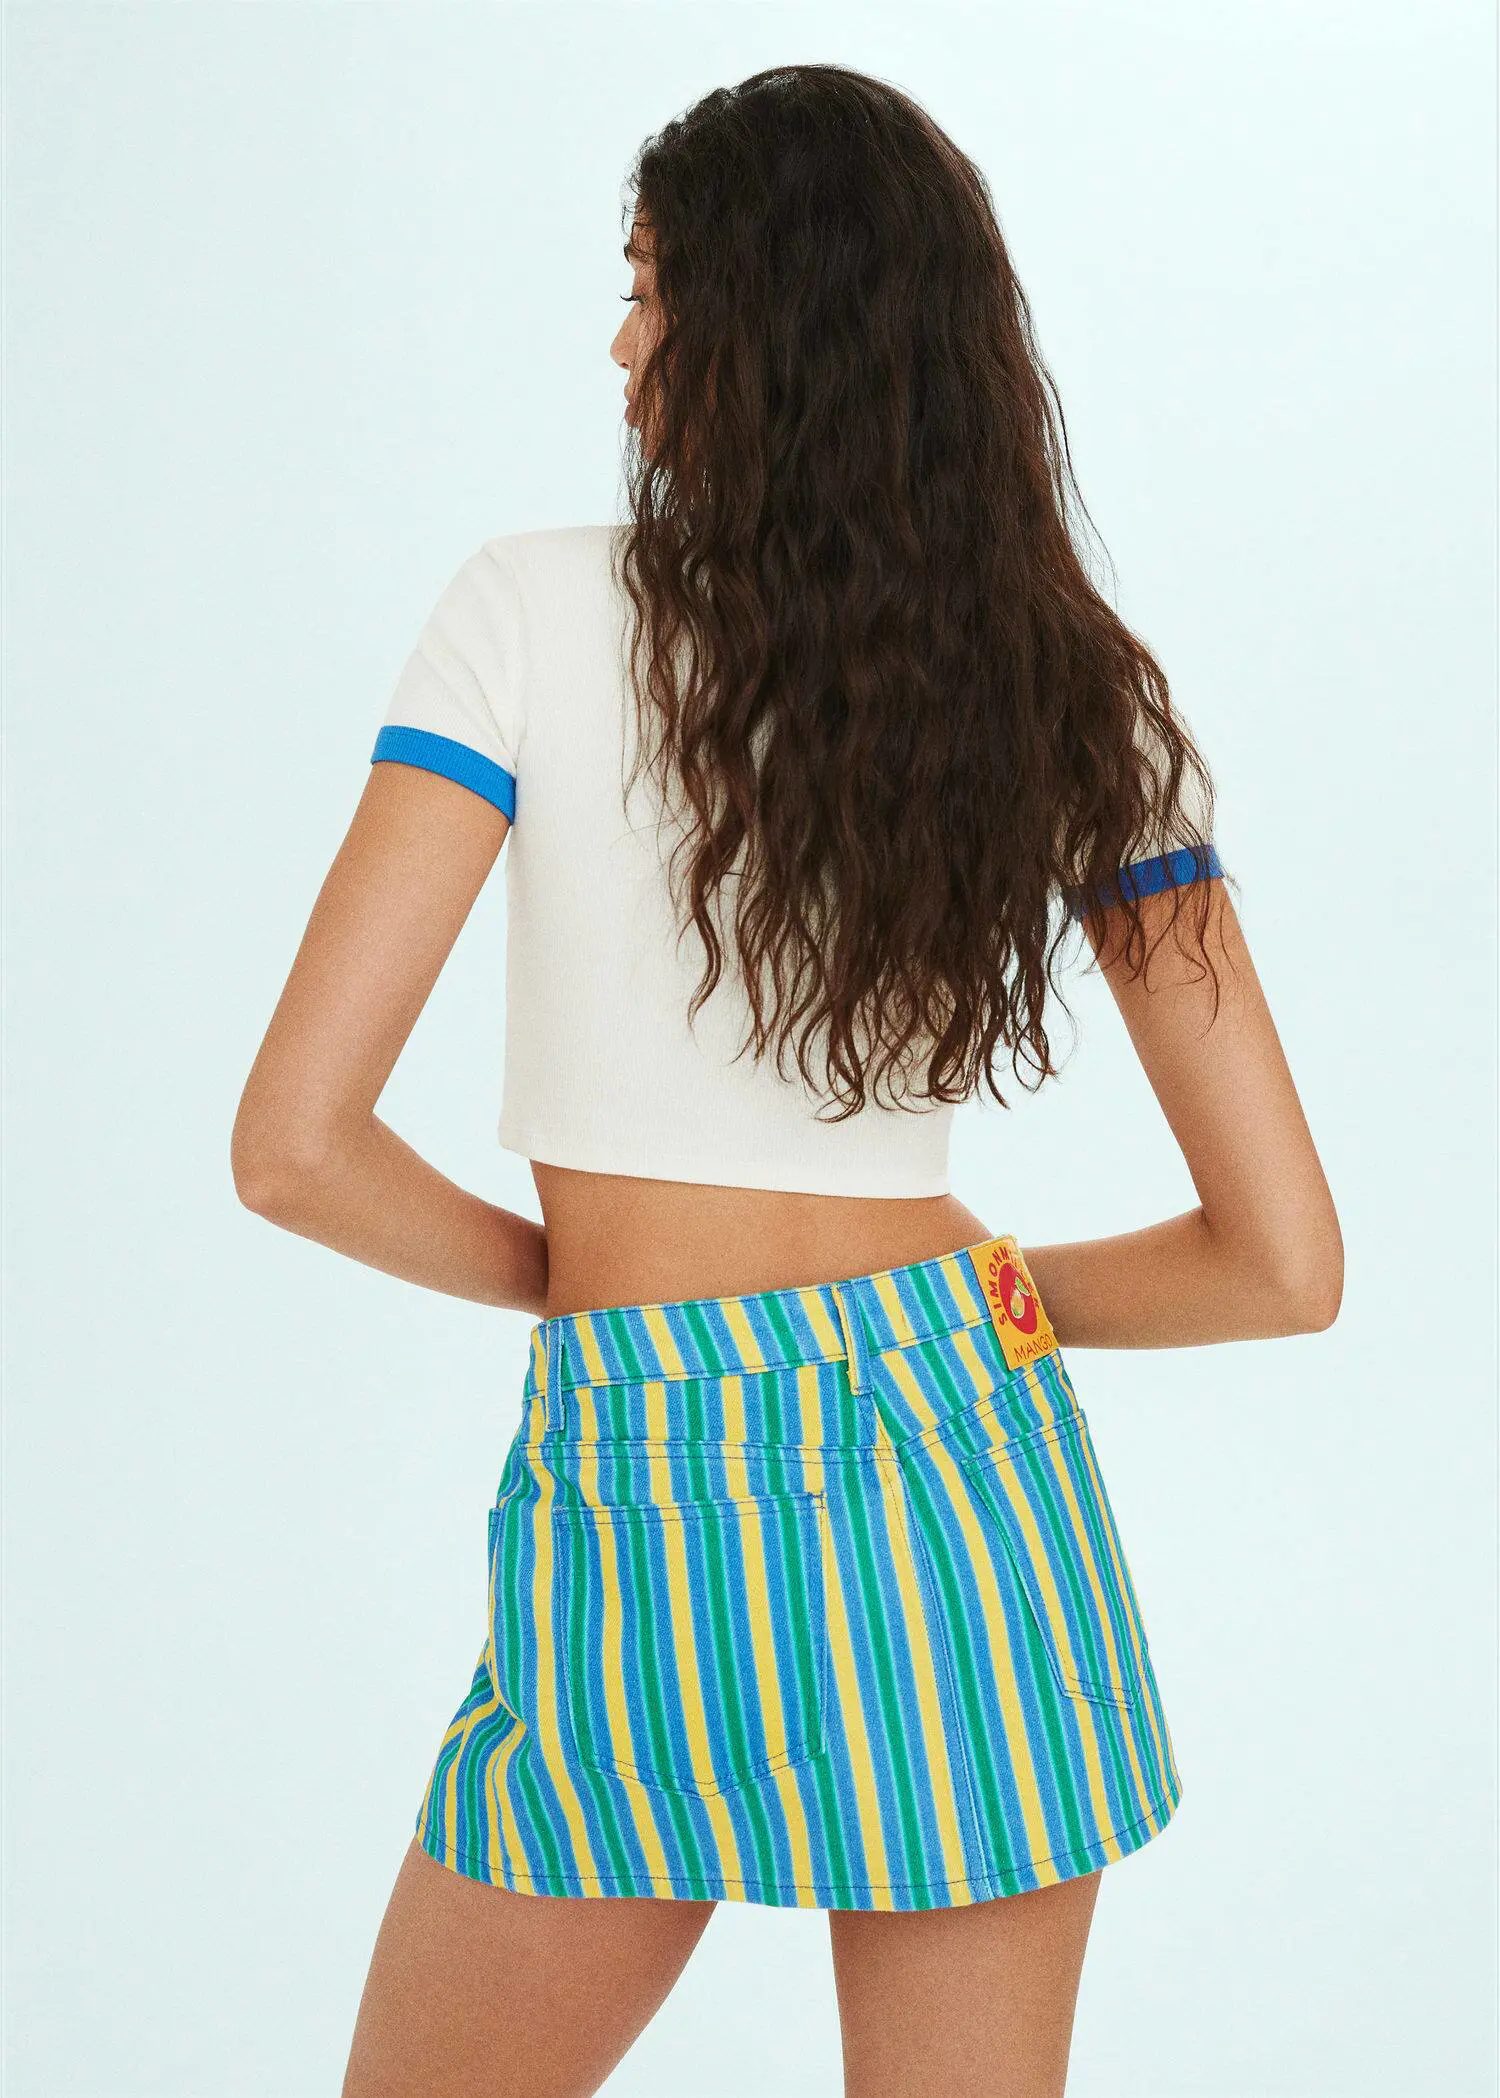 Mango Multi-colored striped denim mini-skirt. a woman in a white crop top and a blue and white striped skirt. 